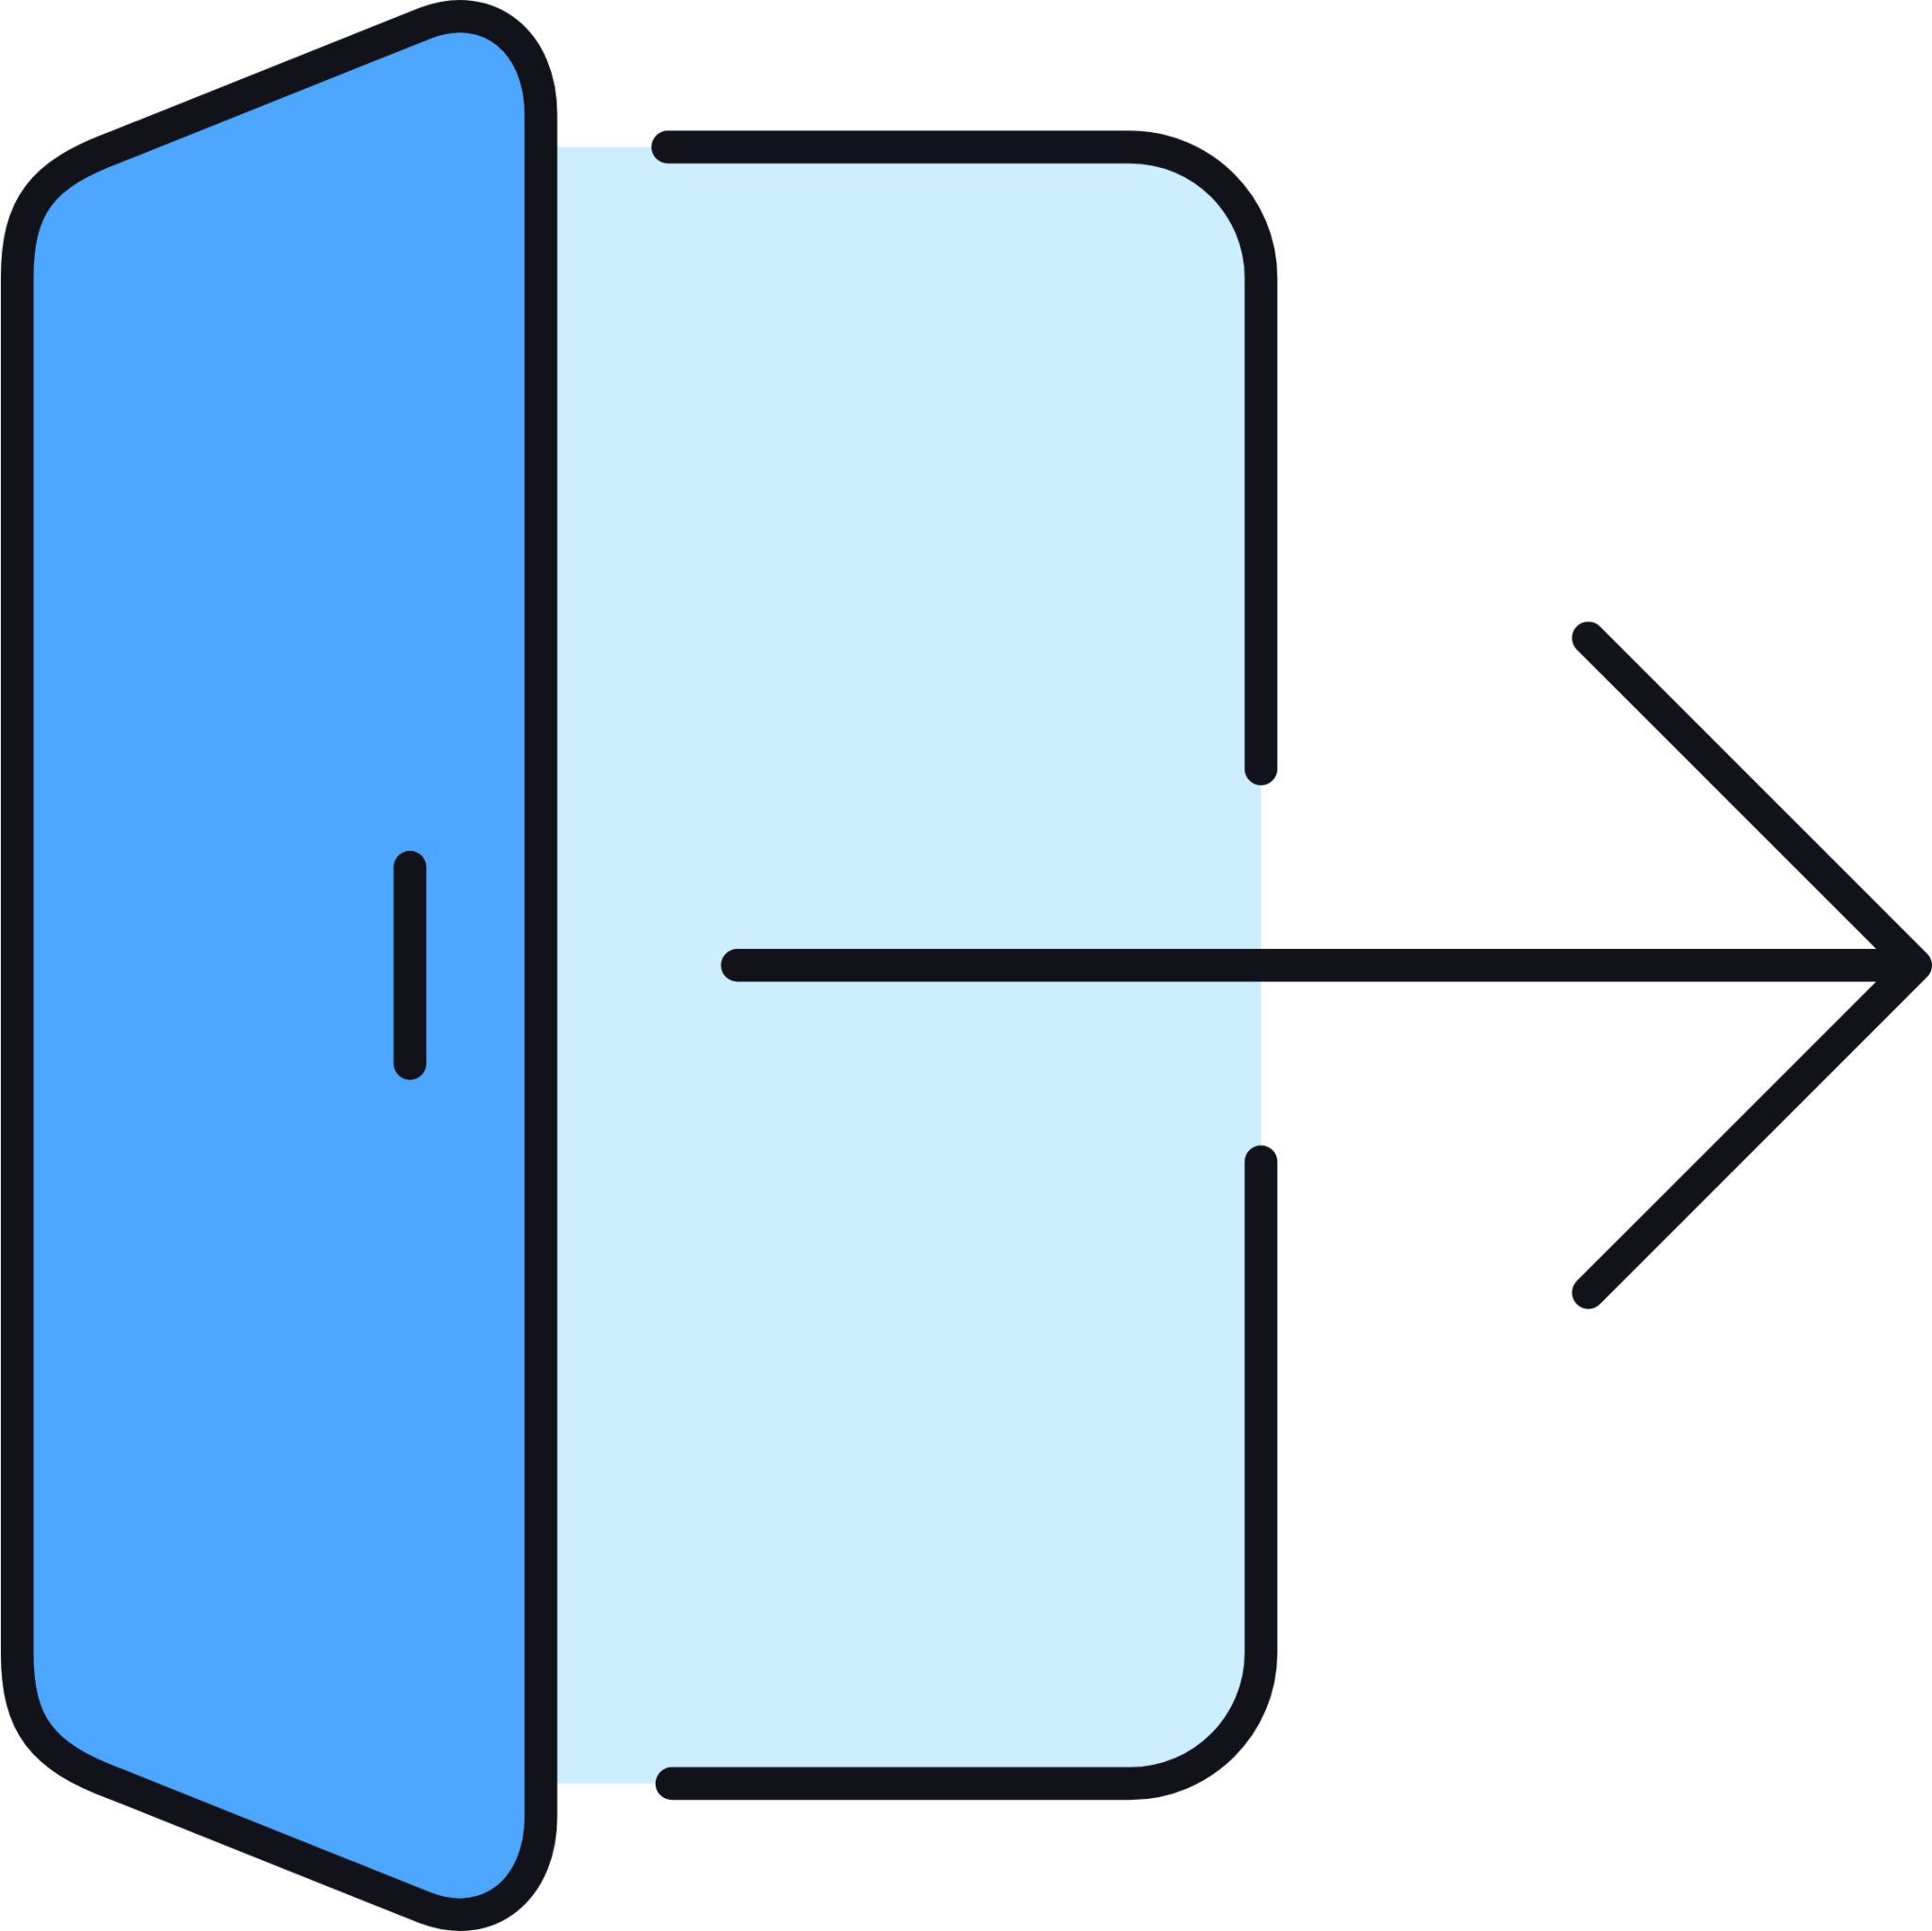 door out icon